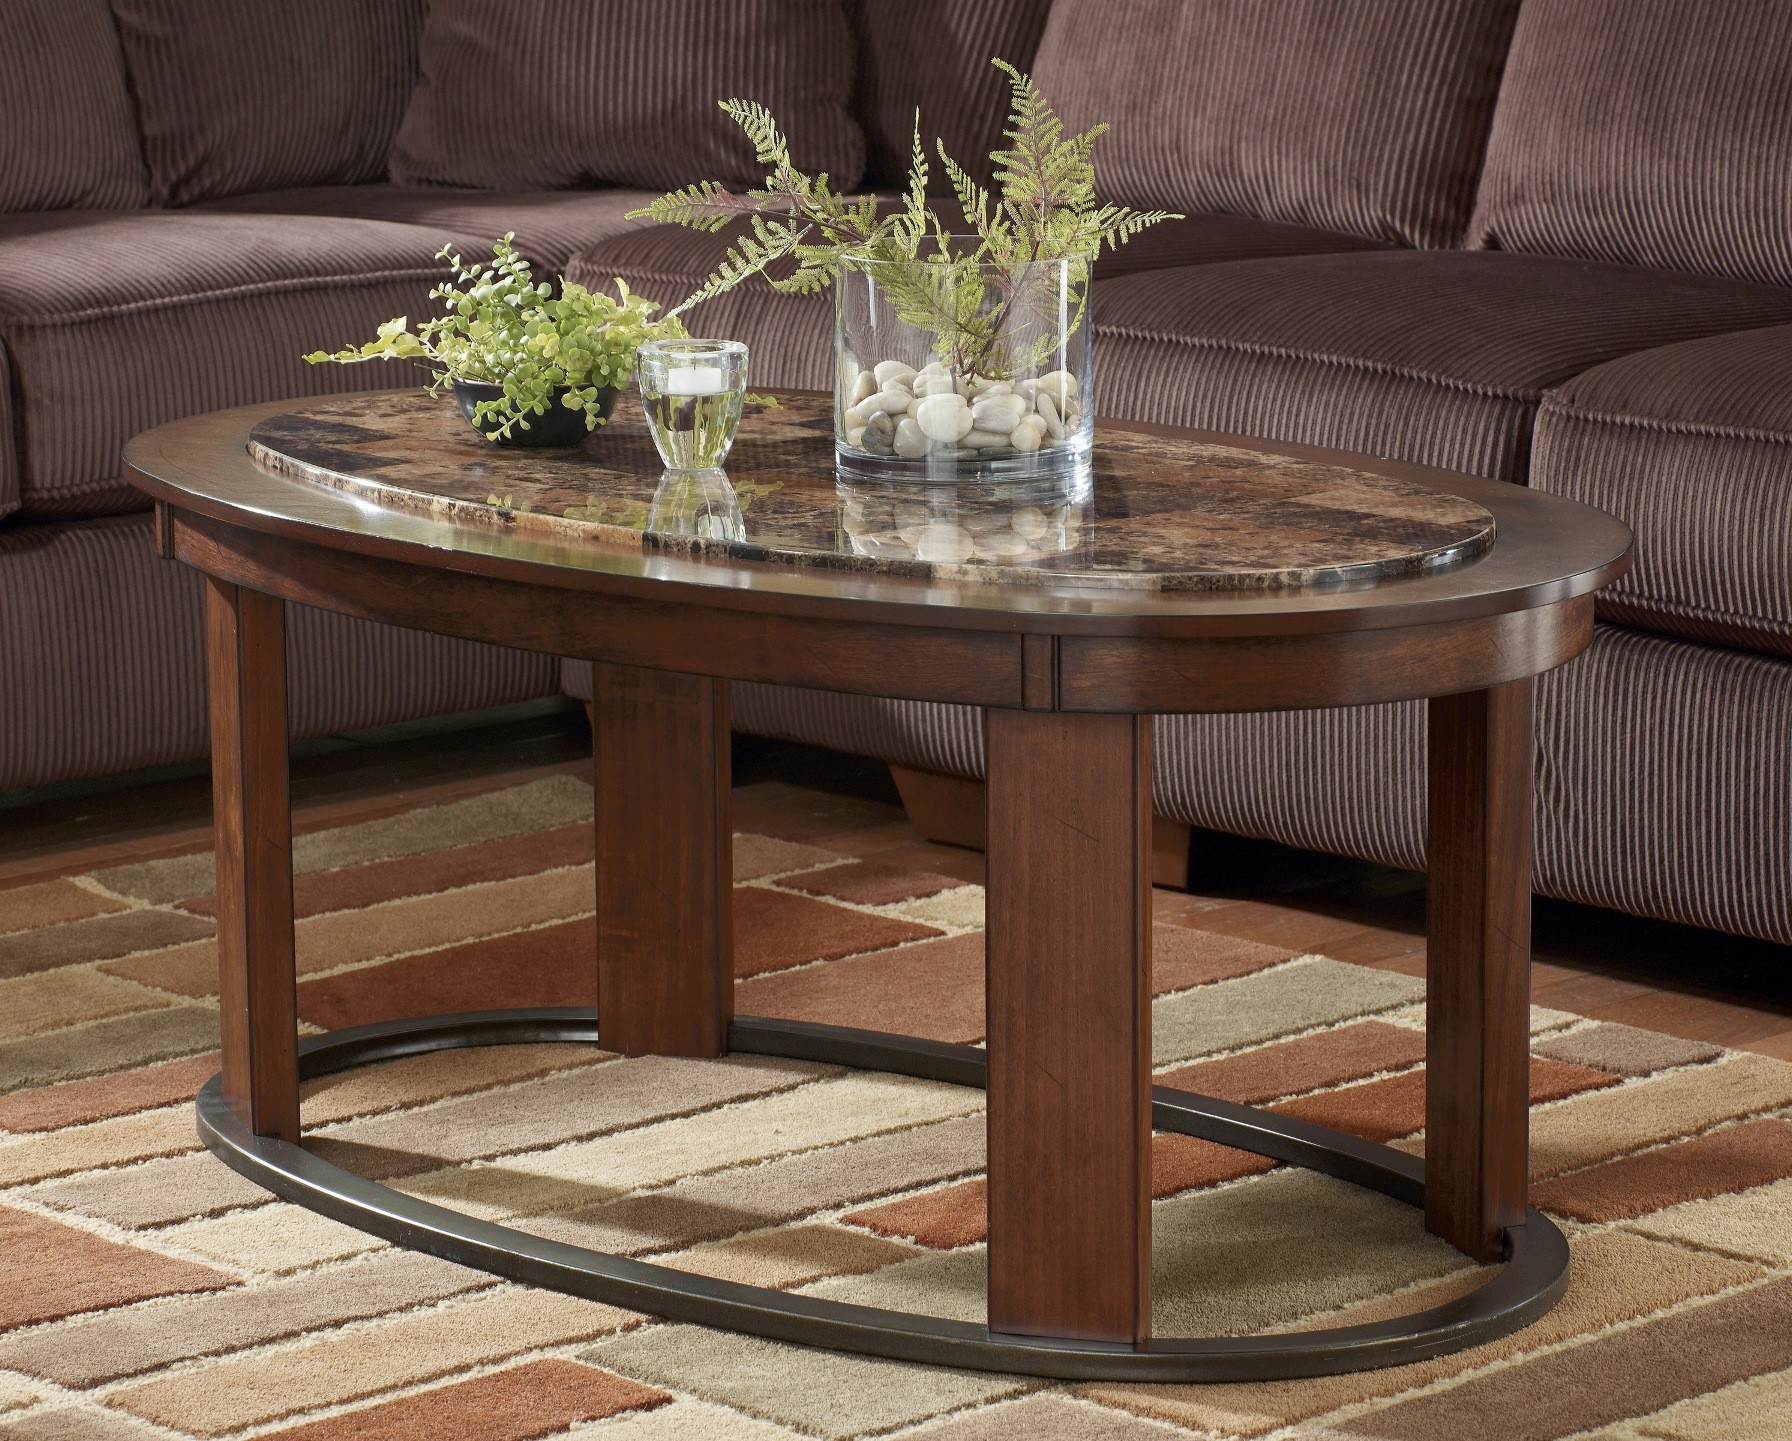 Living Room Oval Coffee Table With Storage